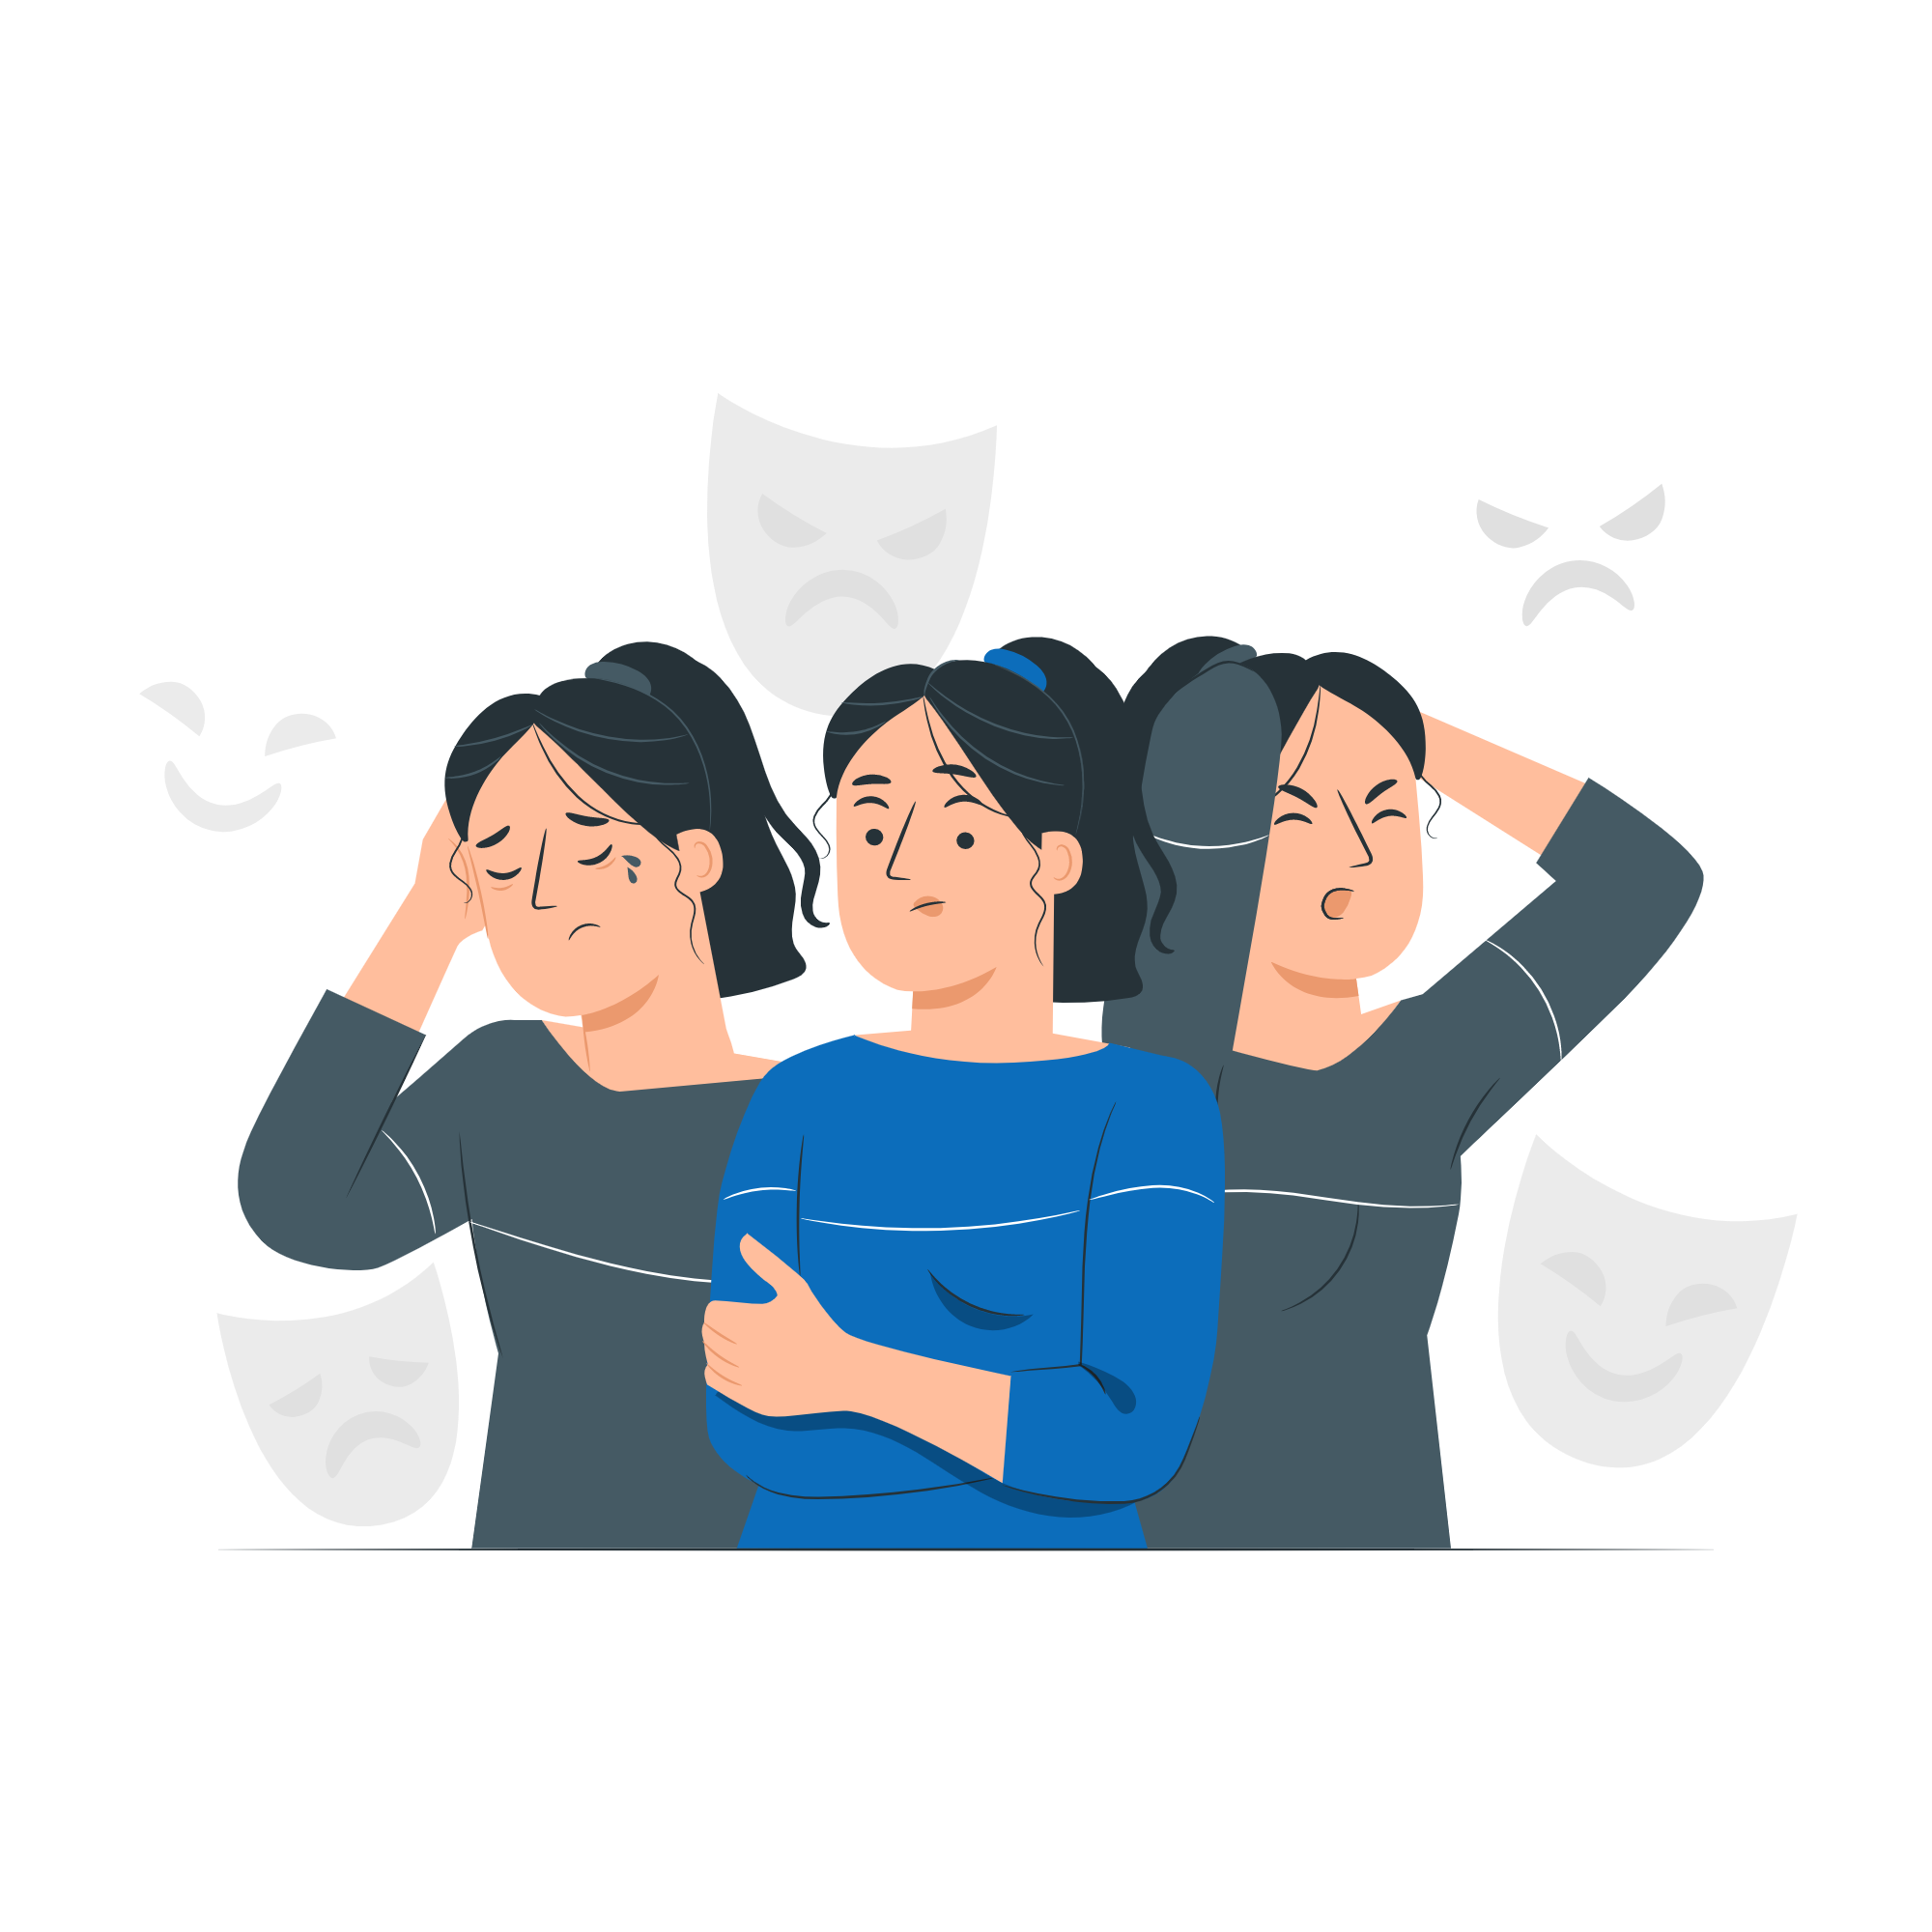 an illustration of a woman struggling with mental health. IT shows three versions of her in various moods.